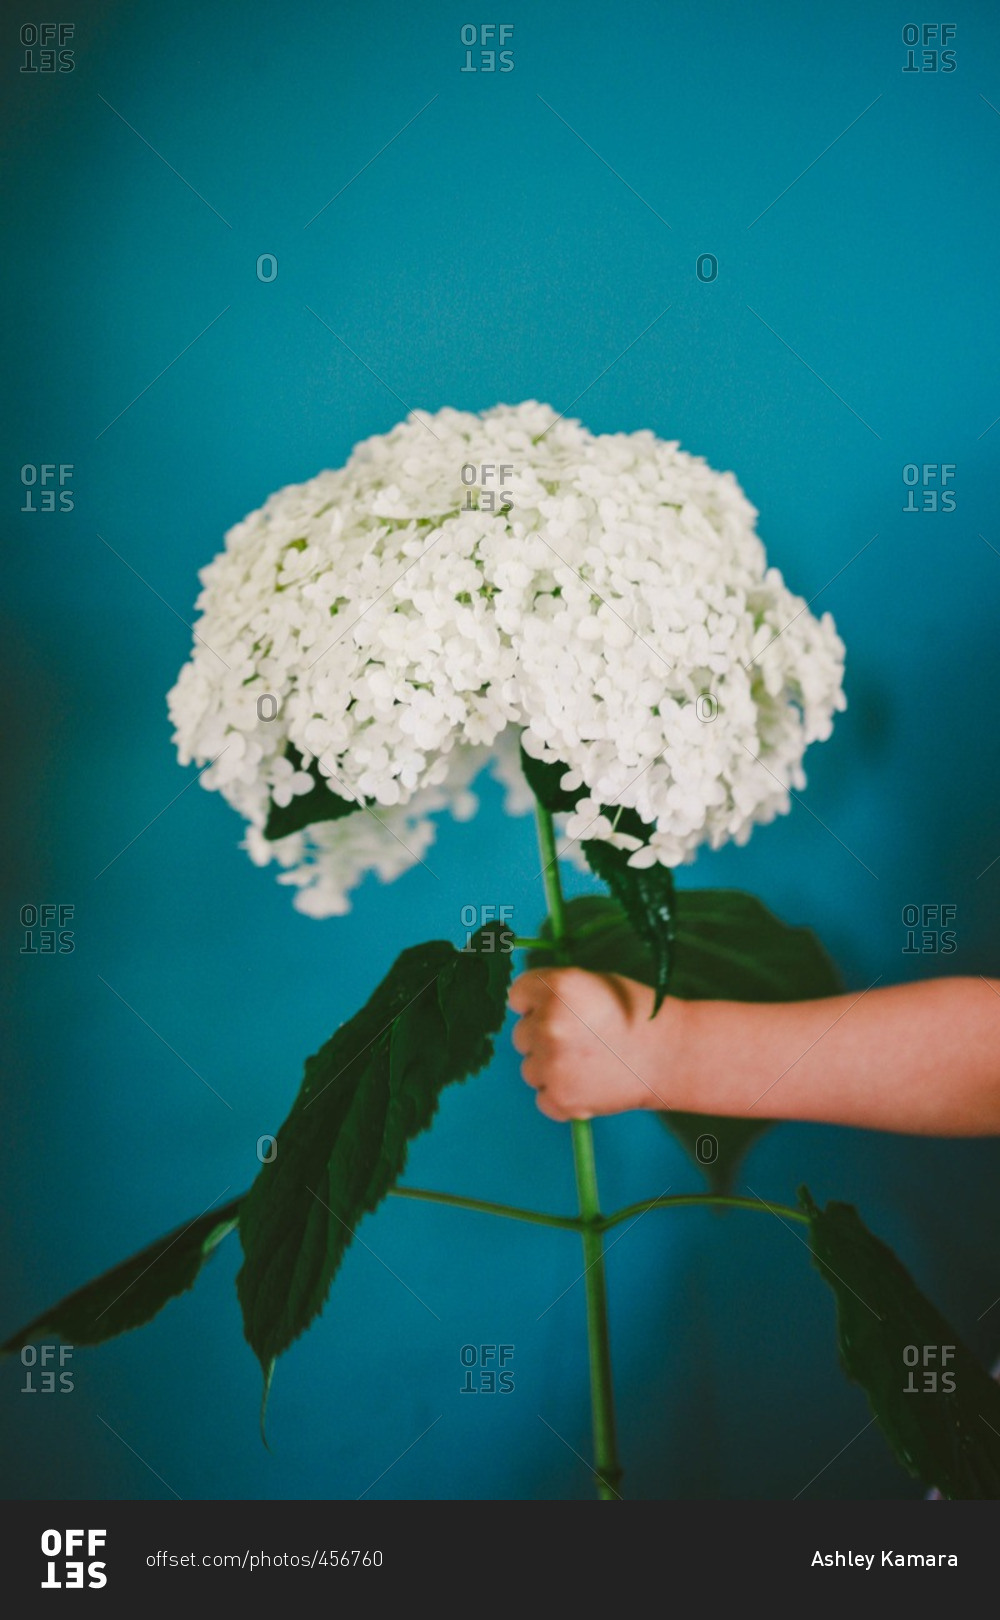 Child's hand holding a large white hydrangea blossom